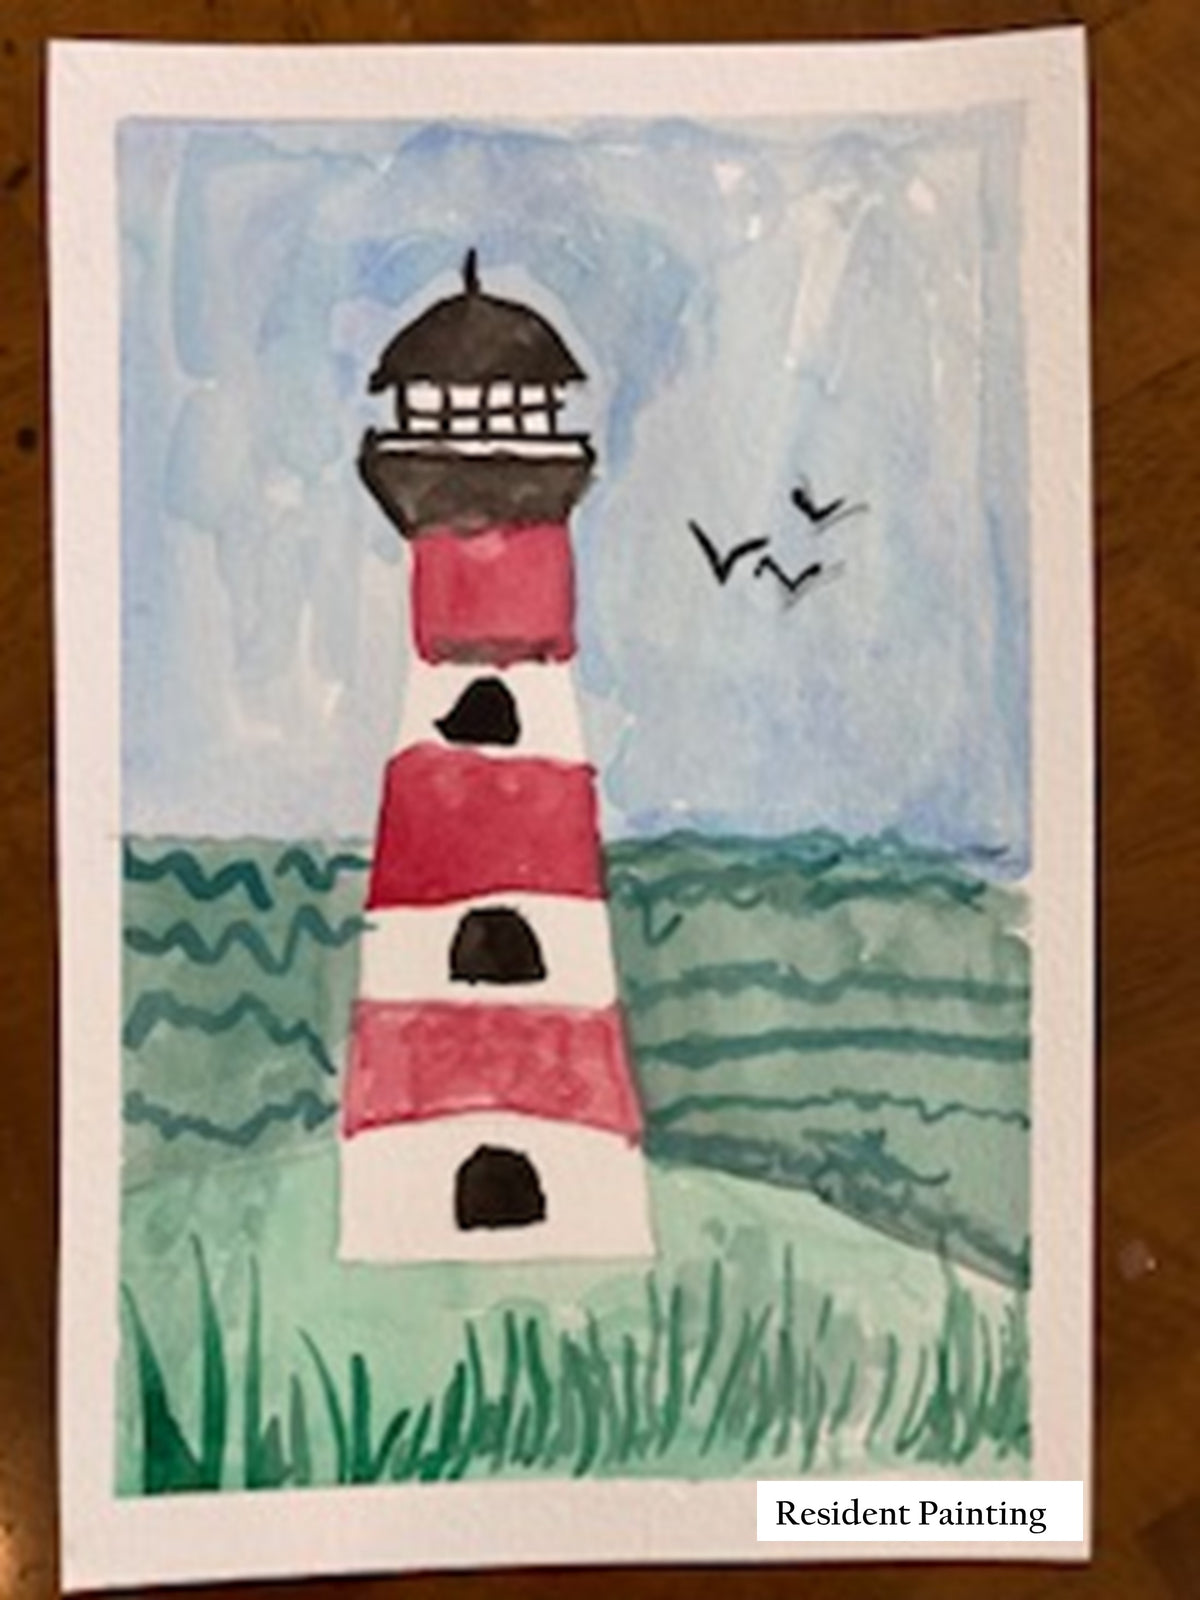 Lighthouse by the Sea